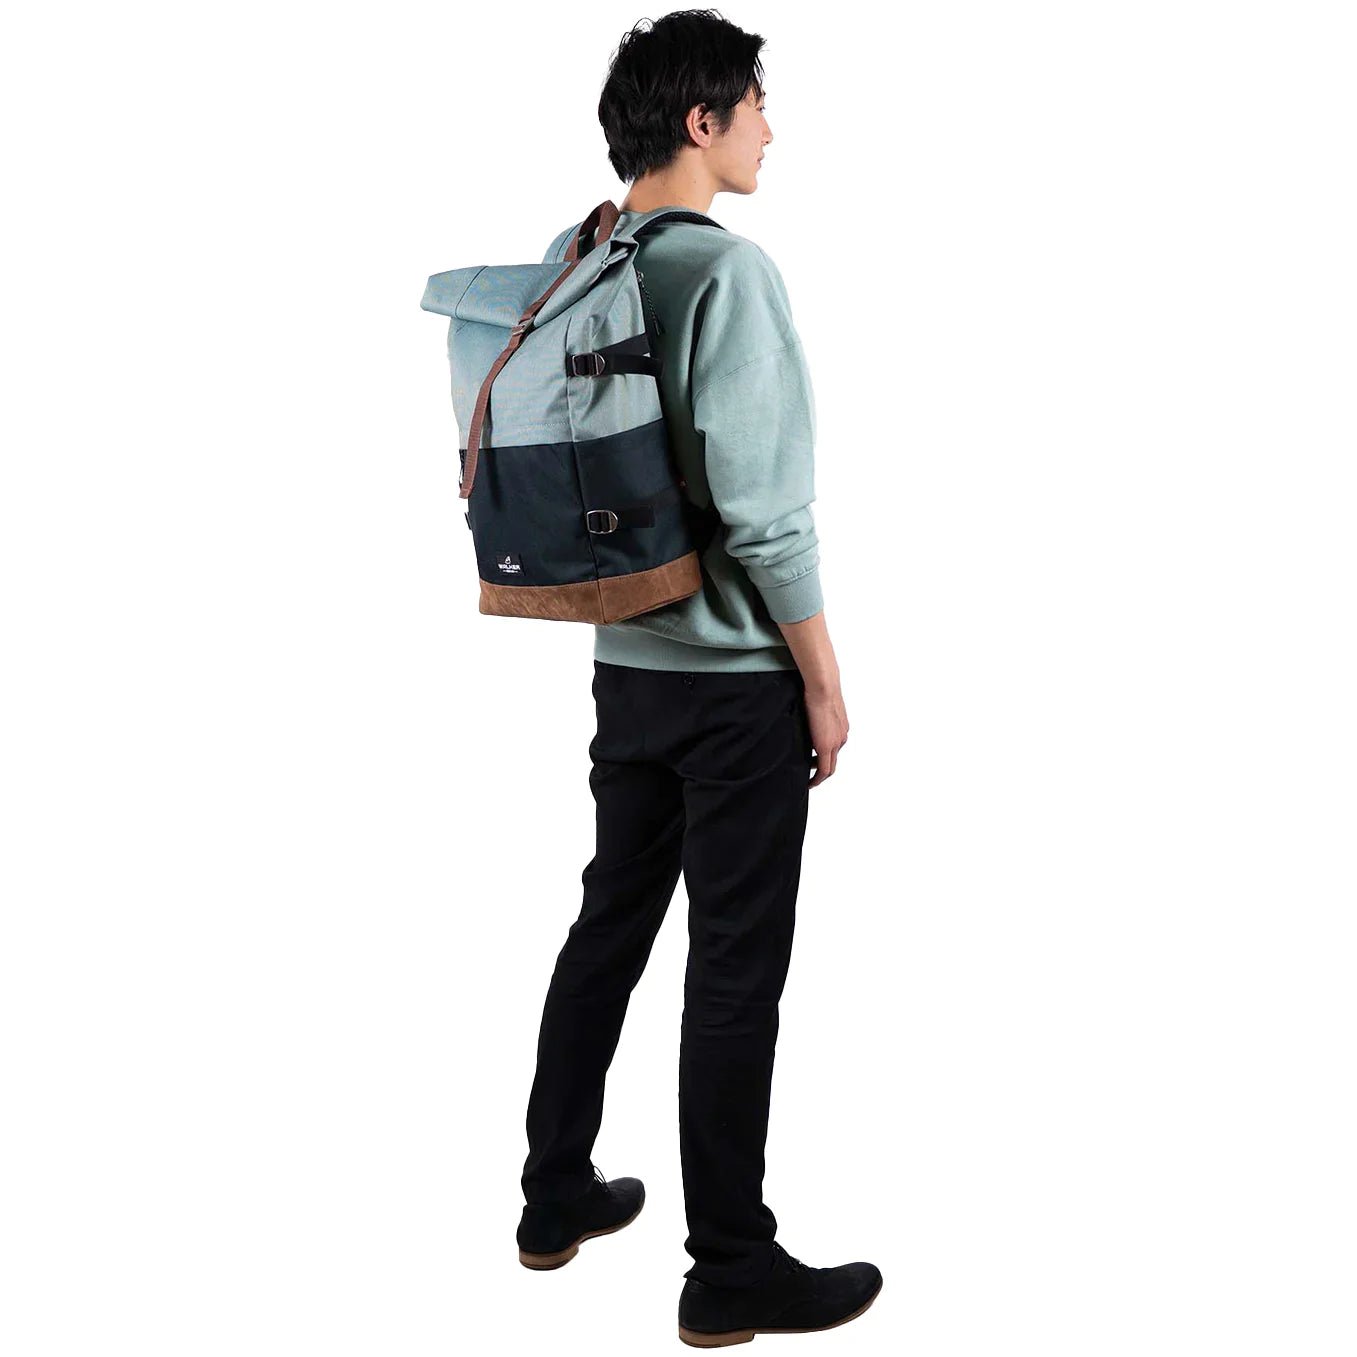 Walker Bags Roll Up Two Backpack 45 cm - Light Grey/Anthracite